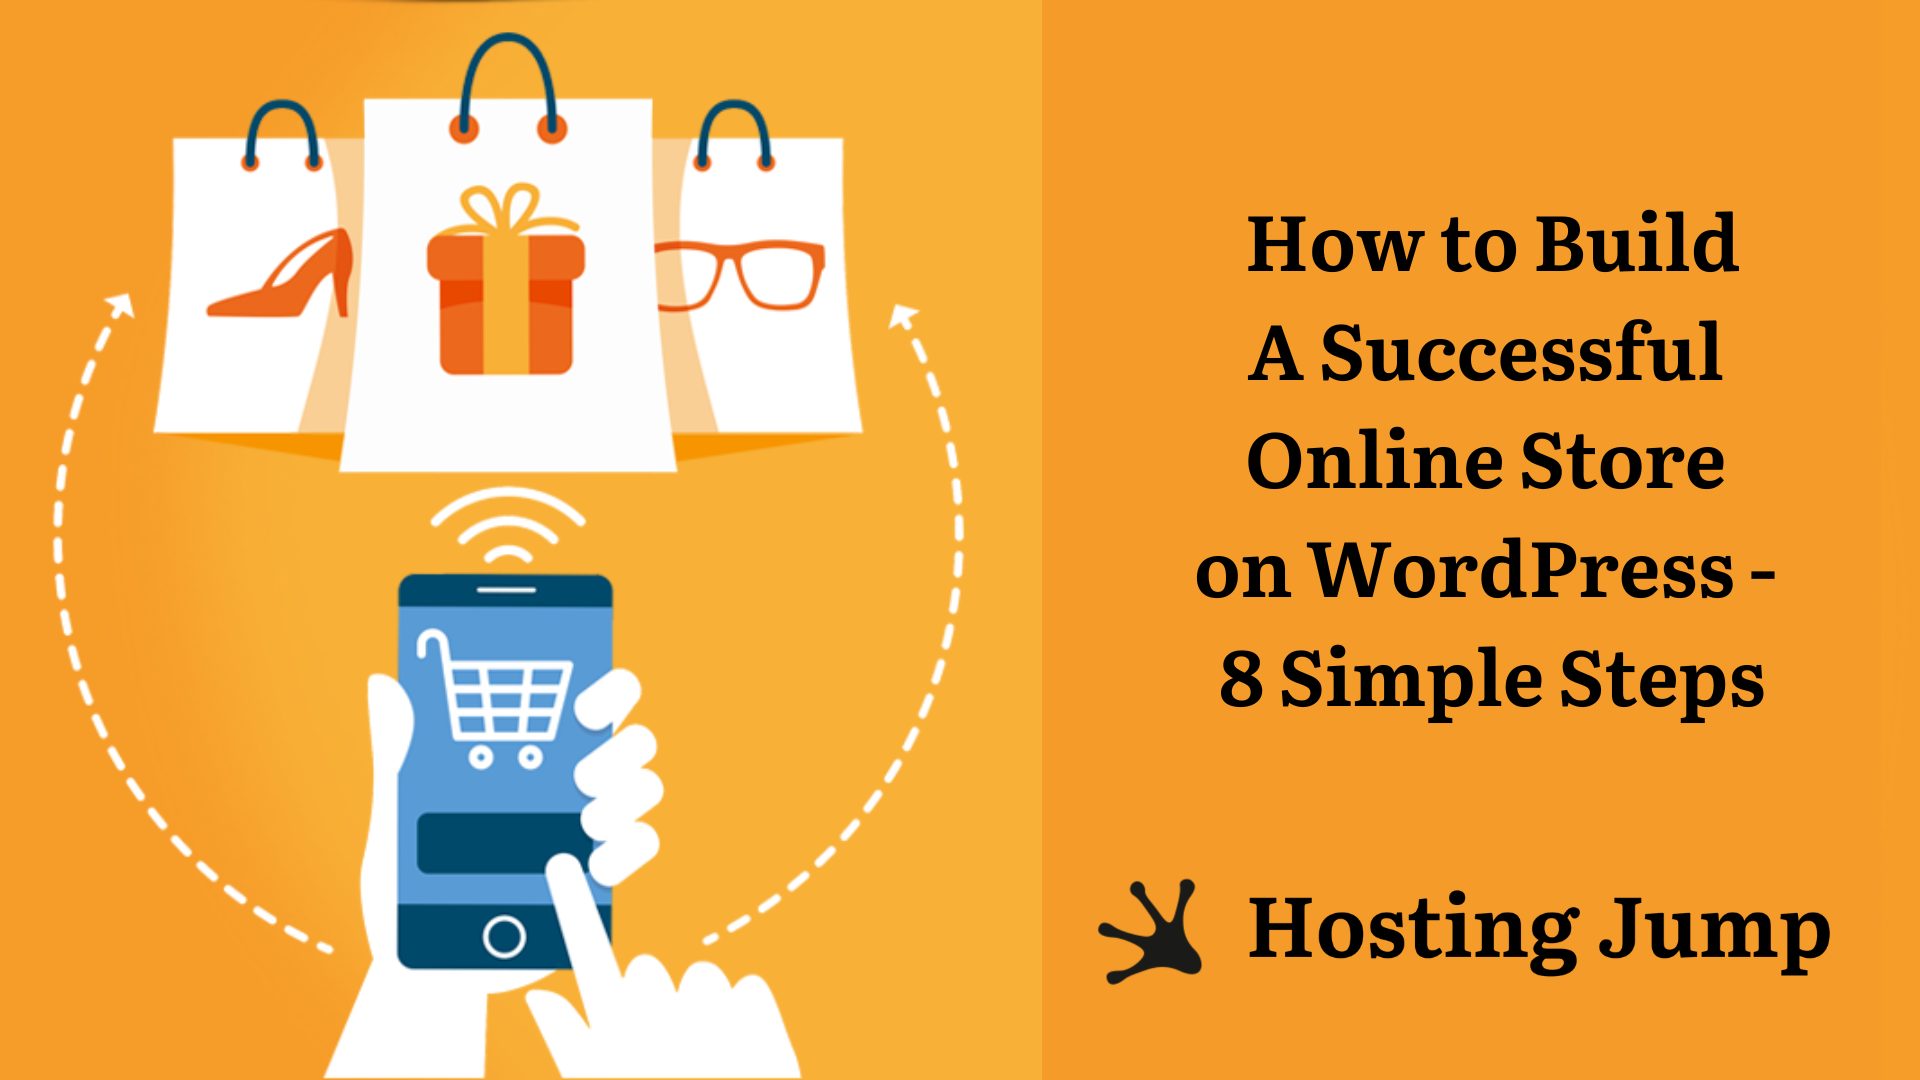 How to Build a Successful Online Store on WordPress - 8 Simple Steps